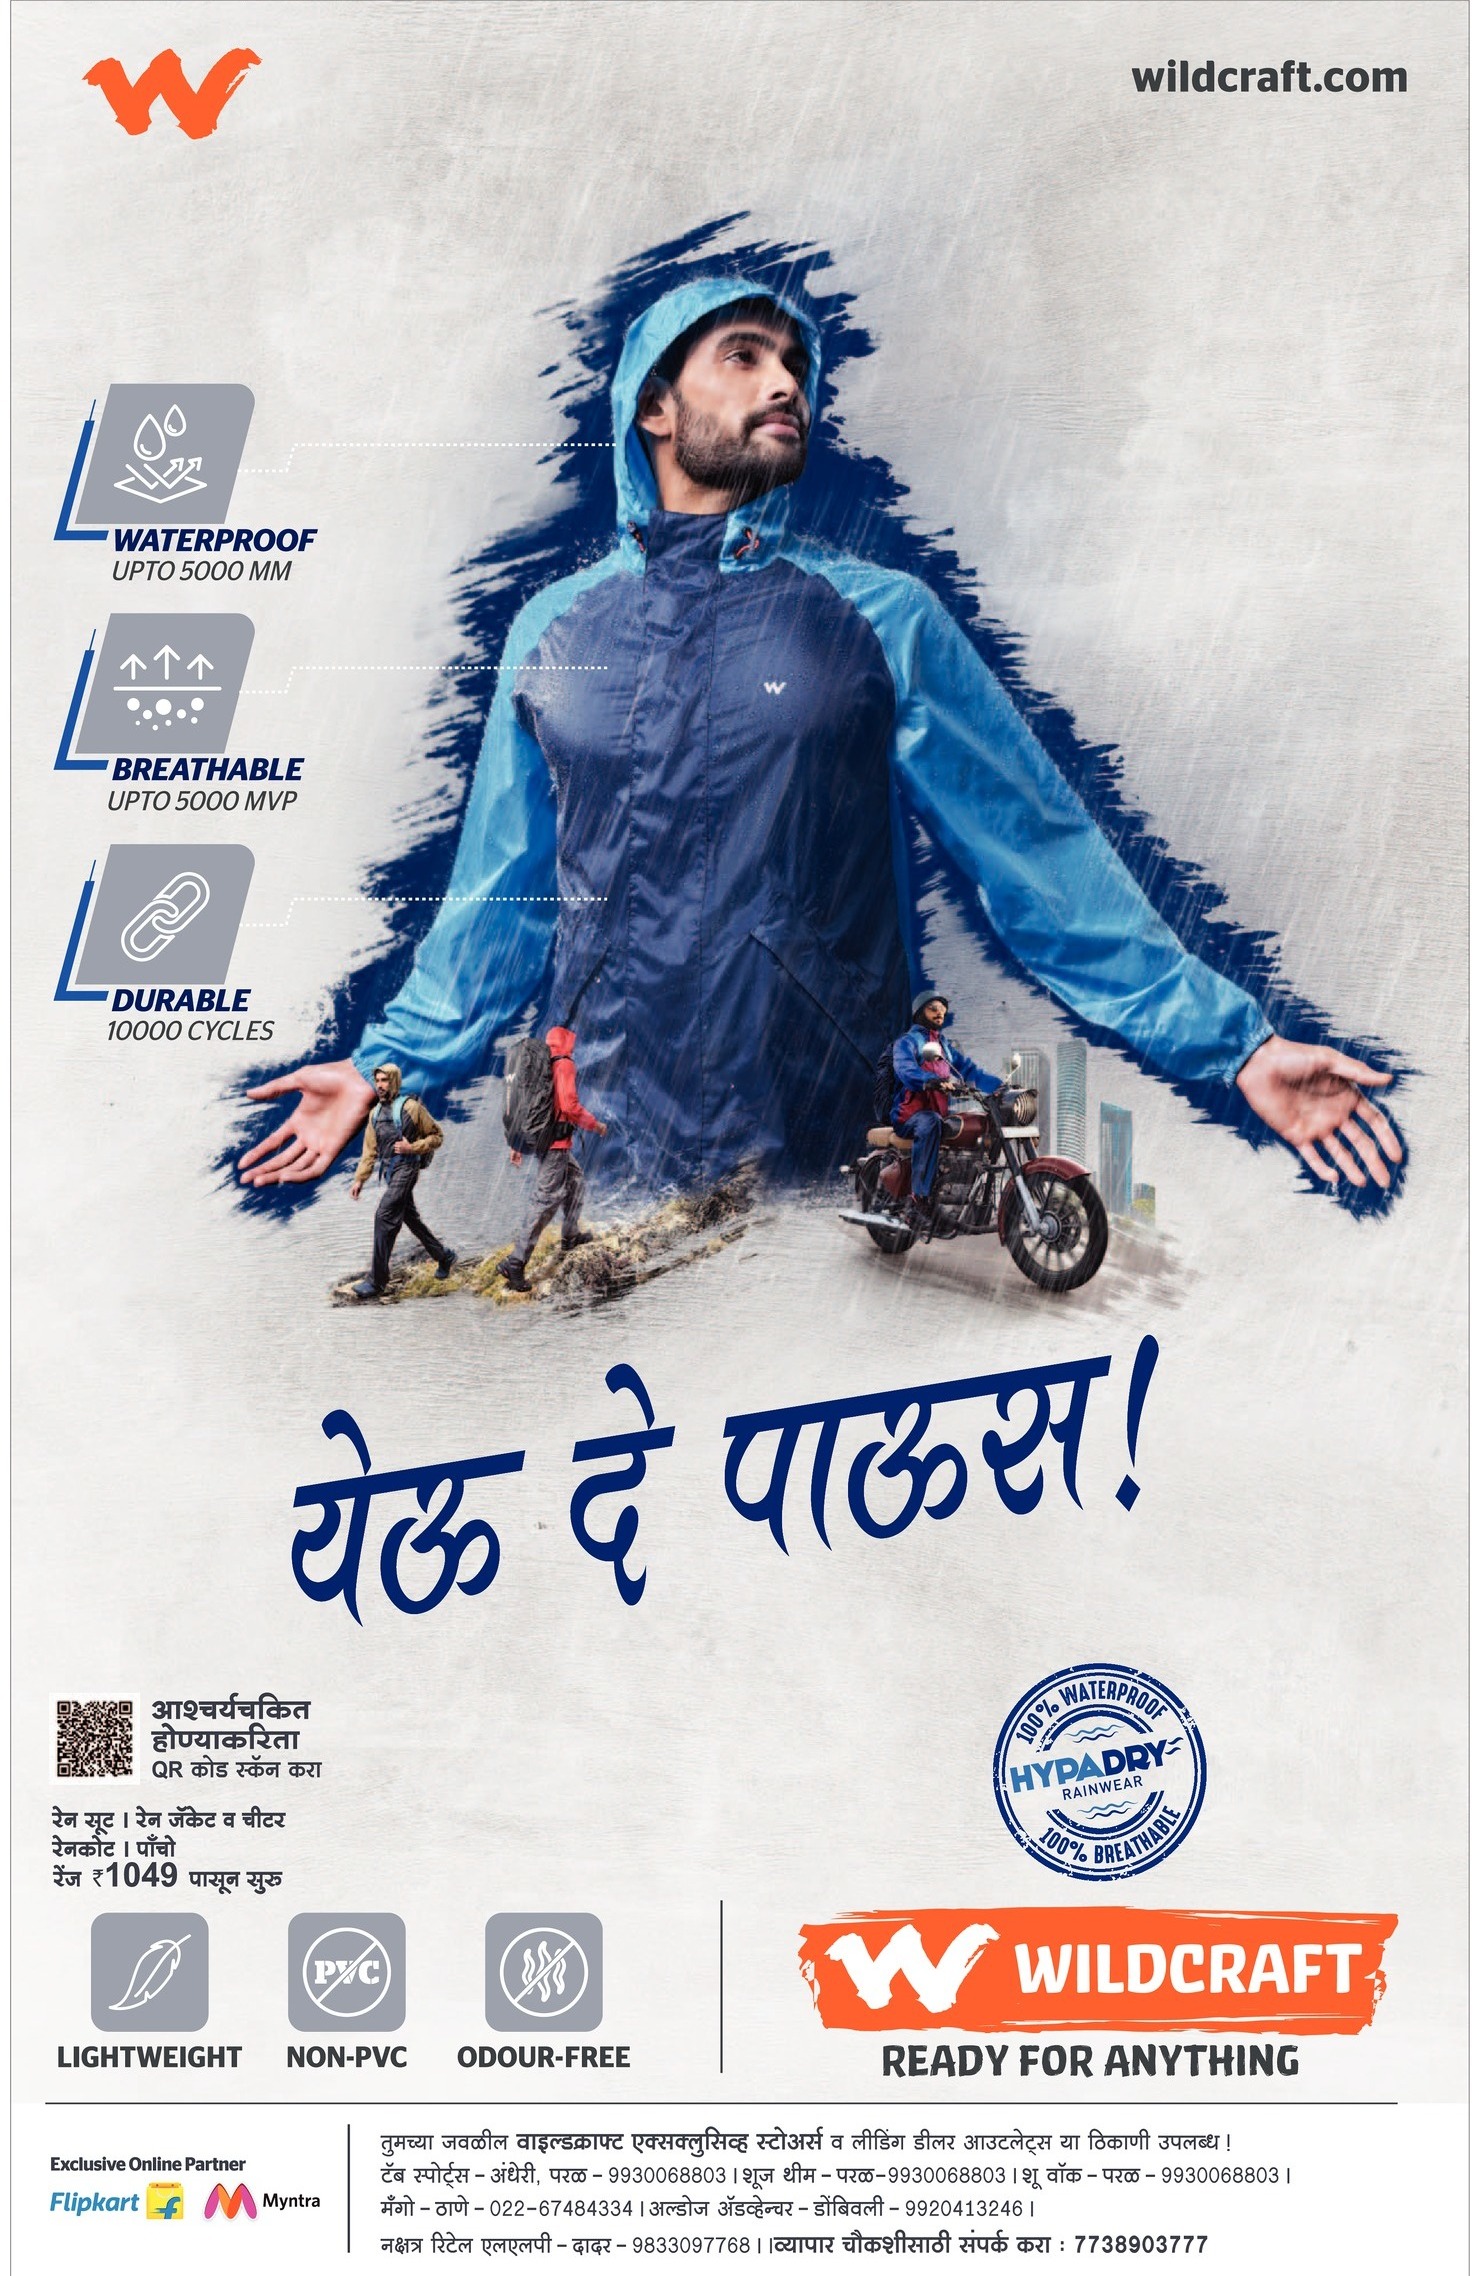 wildcraft-ready-for-anything-water-proof-breathable-durable-ad-lokmat-mumbai-24-06-2021